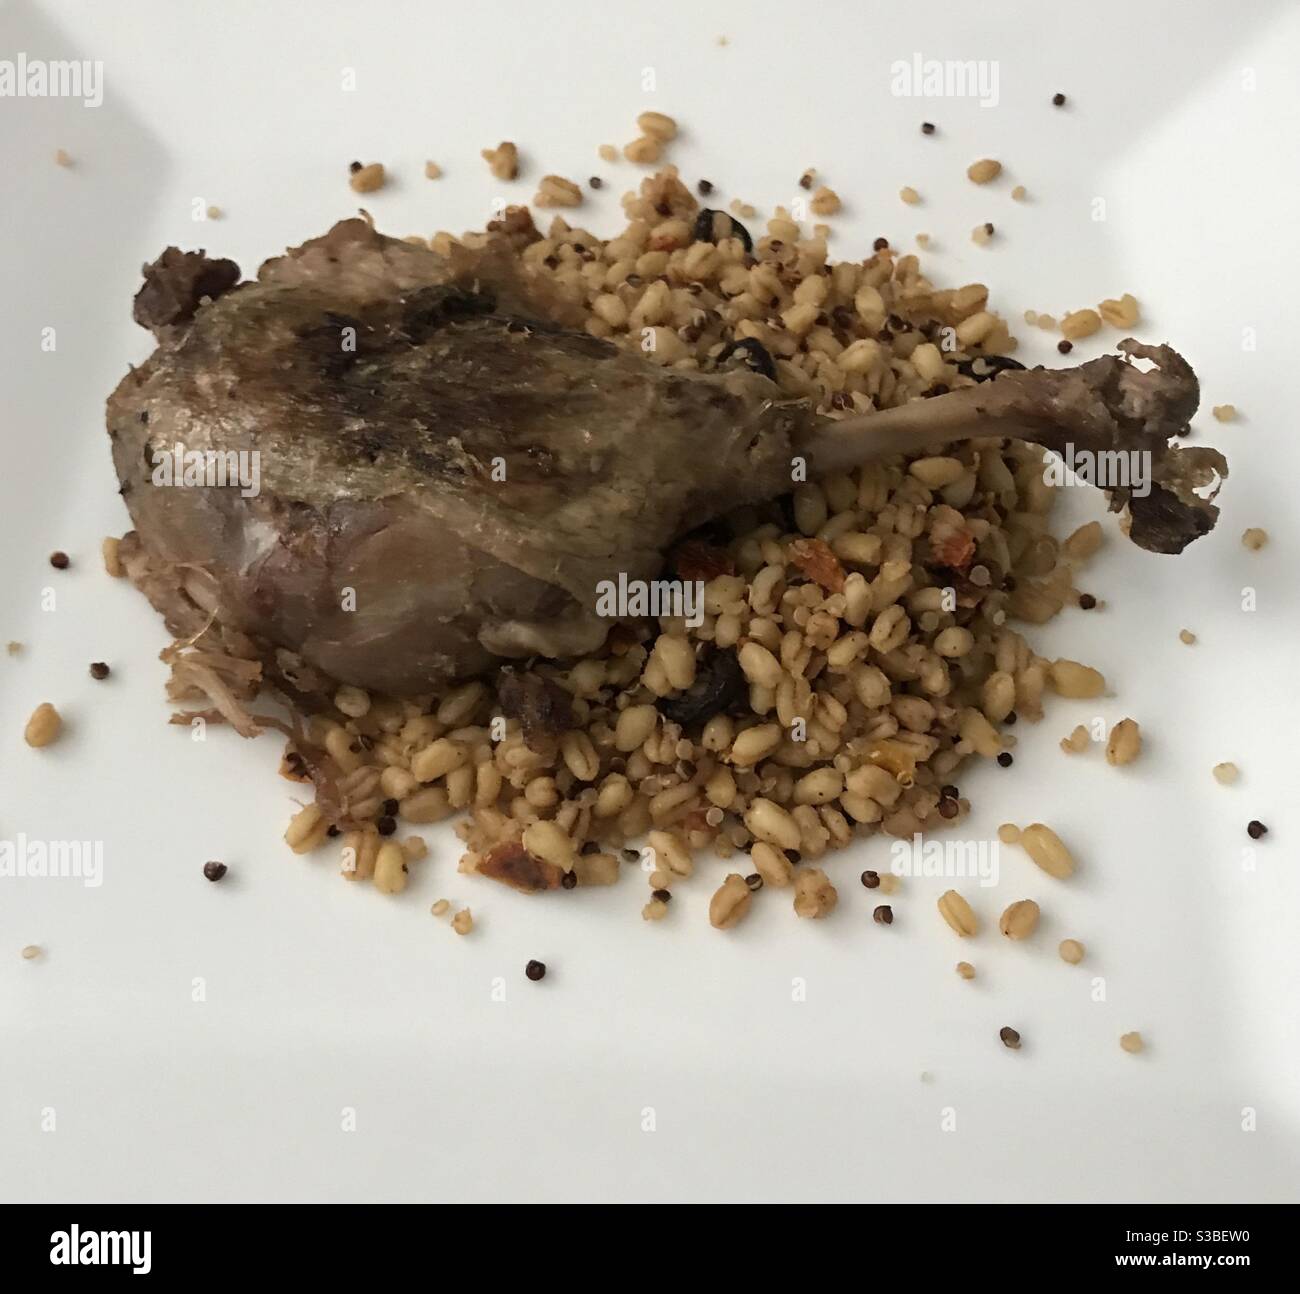 Pan fried confit duck leg on a wooden background Stock Photo